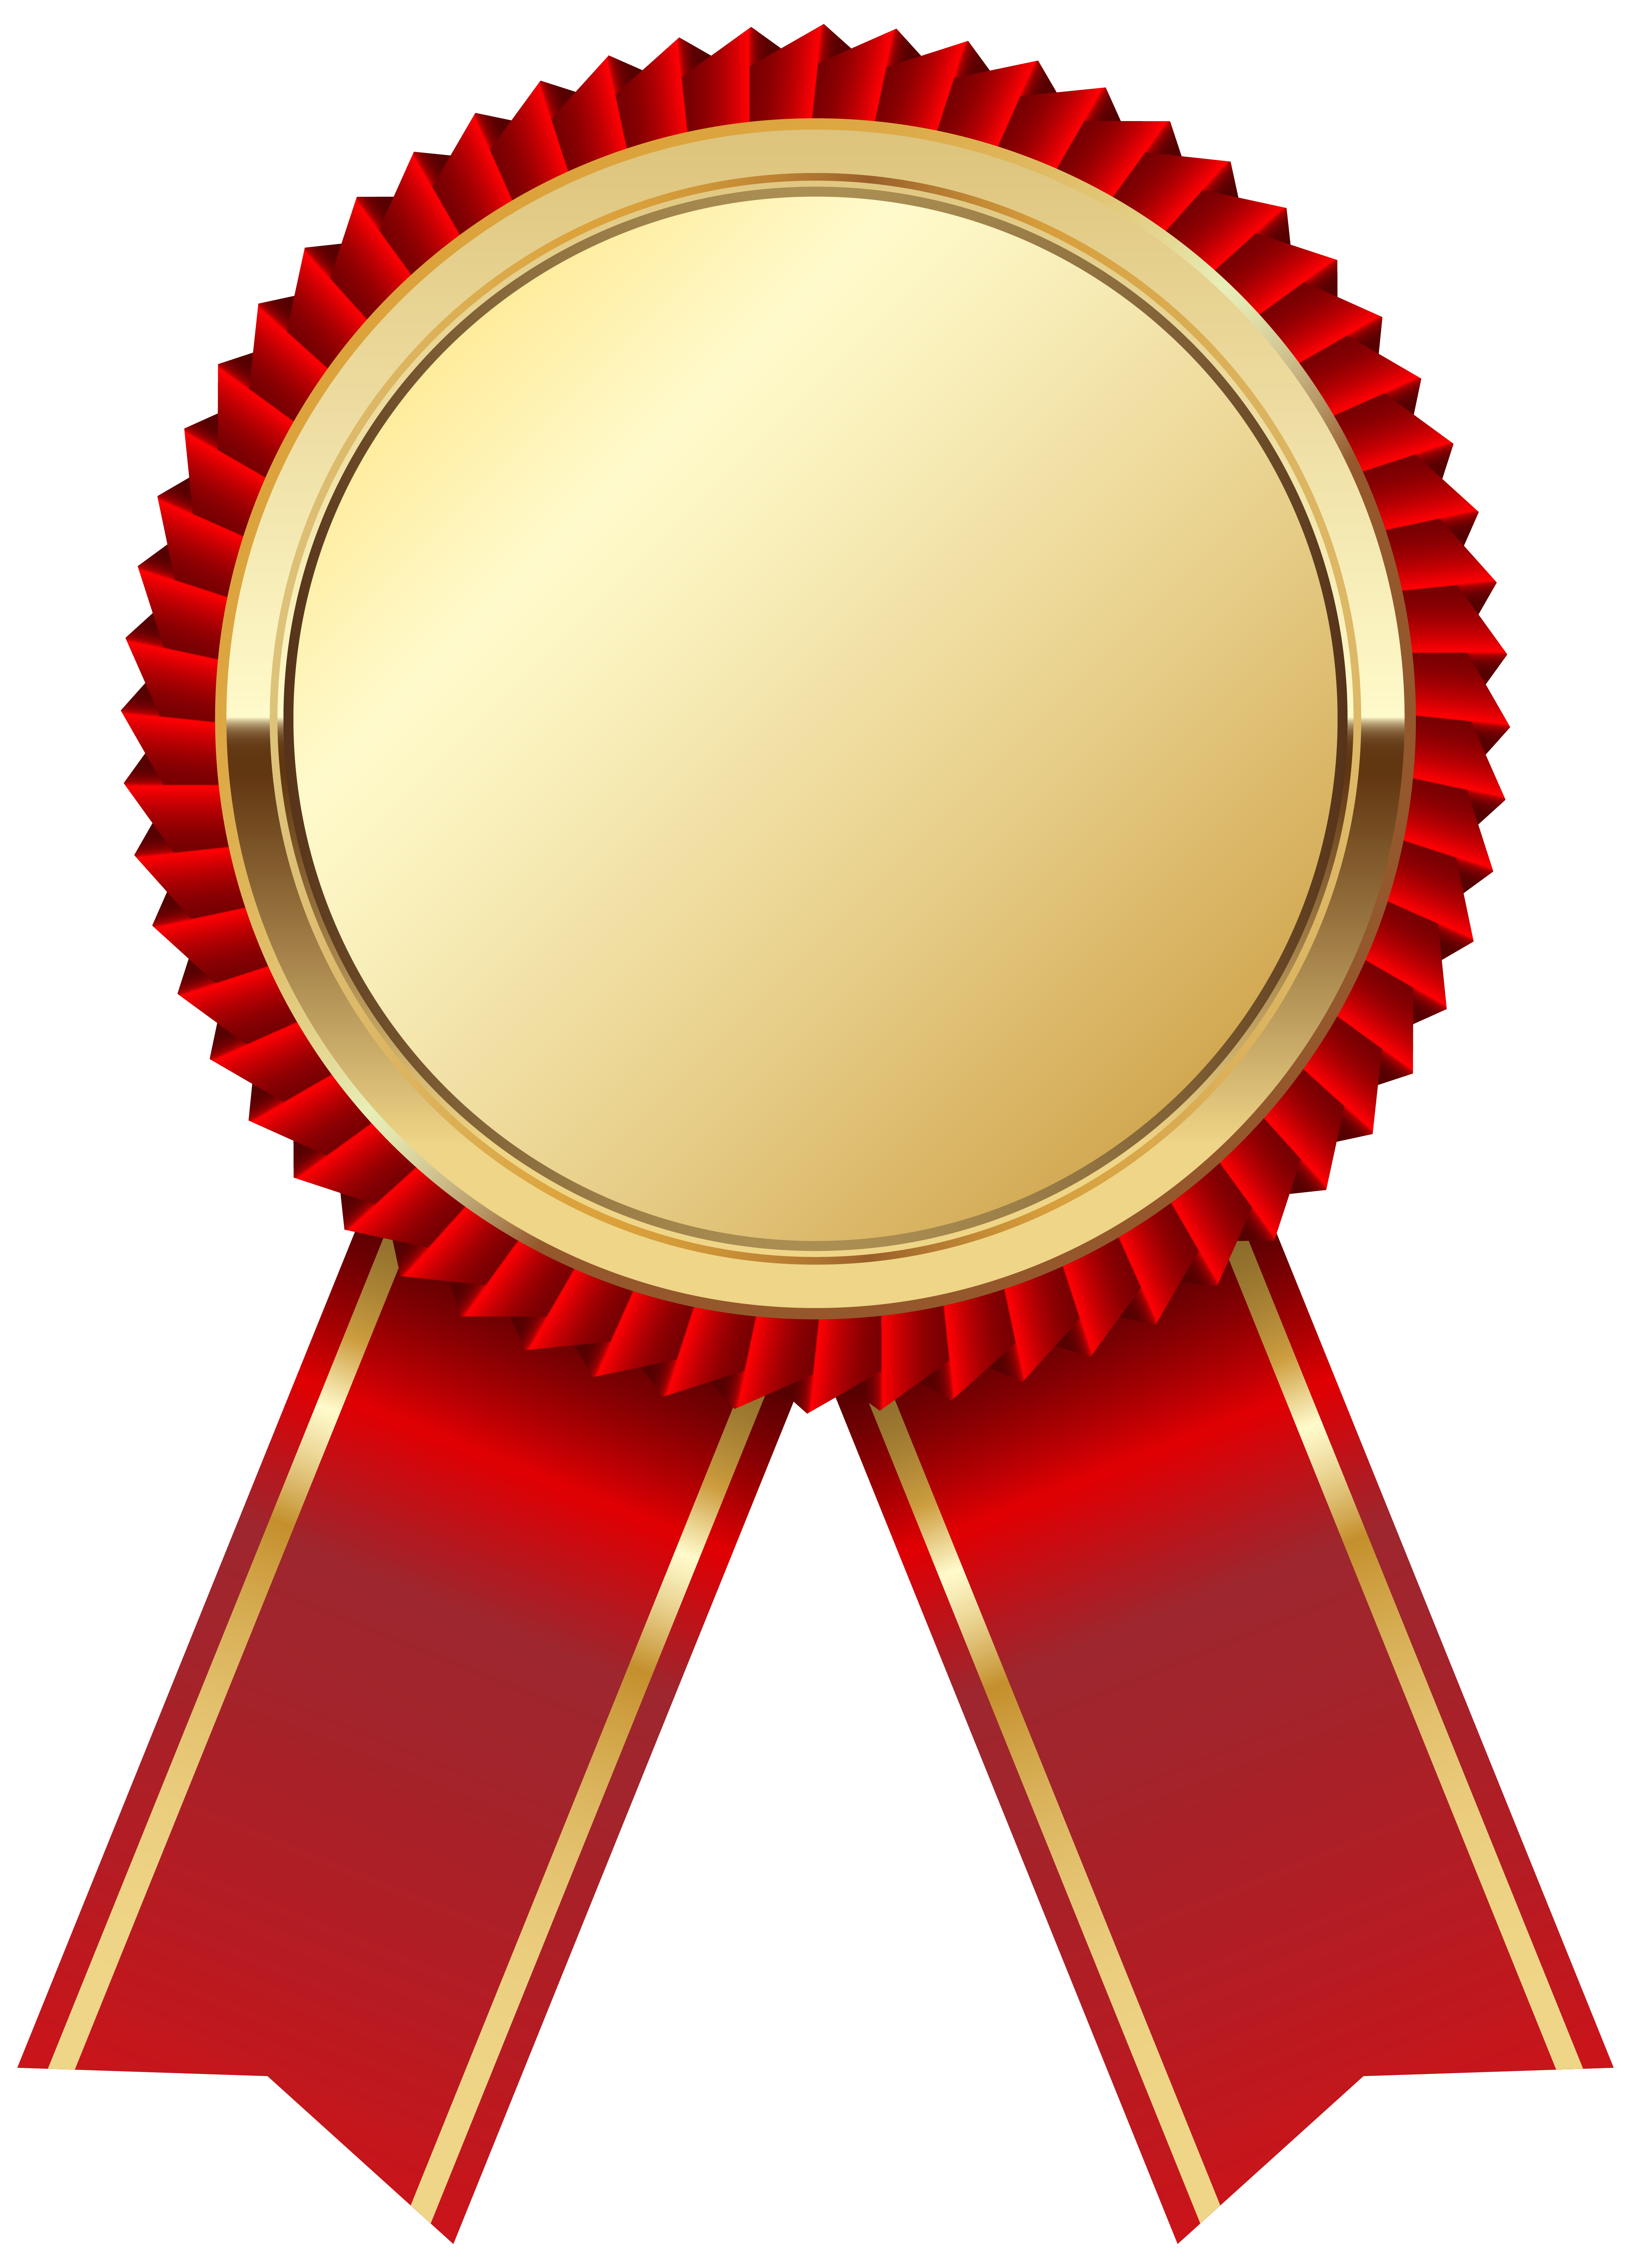 clipart of gold medals - photo #33